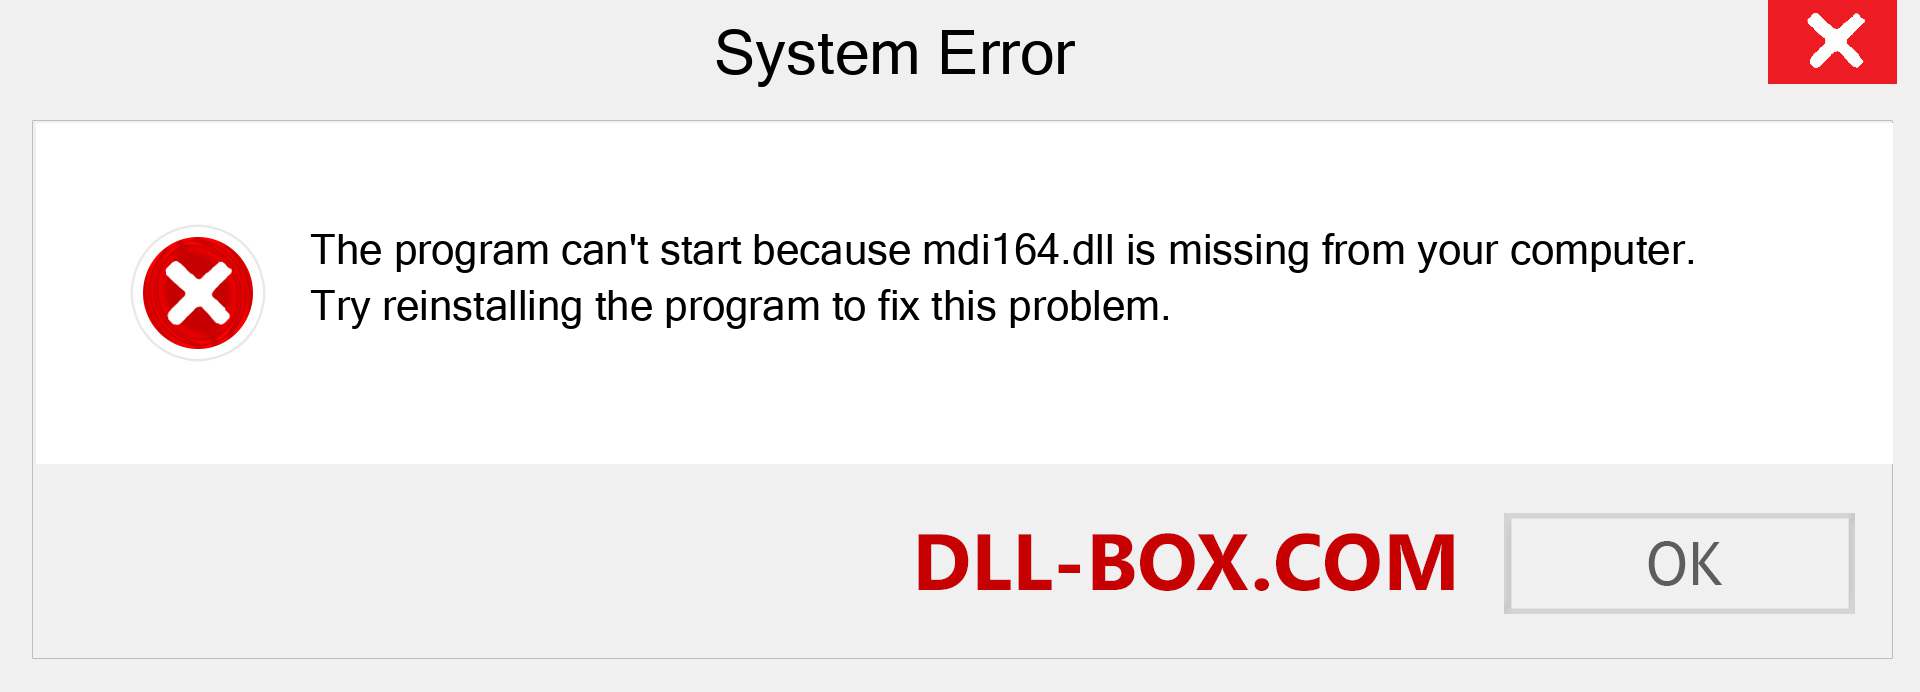  mdi164.dll file is missing?. Download for Windows 7, 8, 10 - Fix  mdi164 dll Missing Error on Windows, photos, images